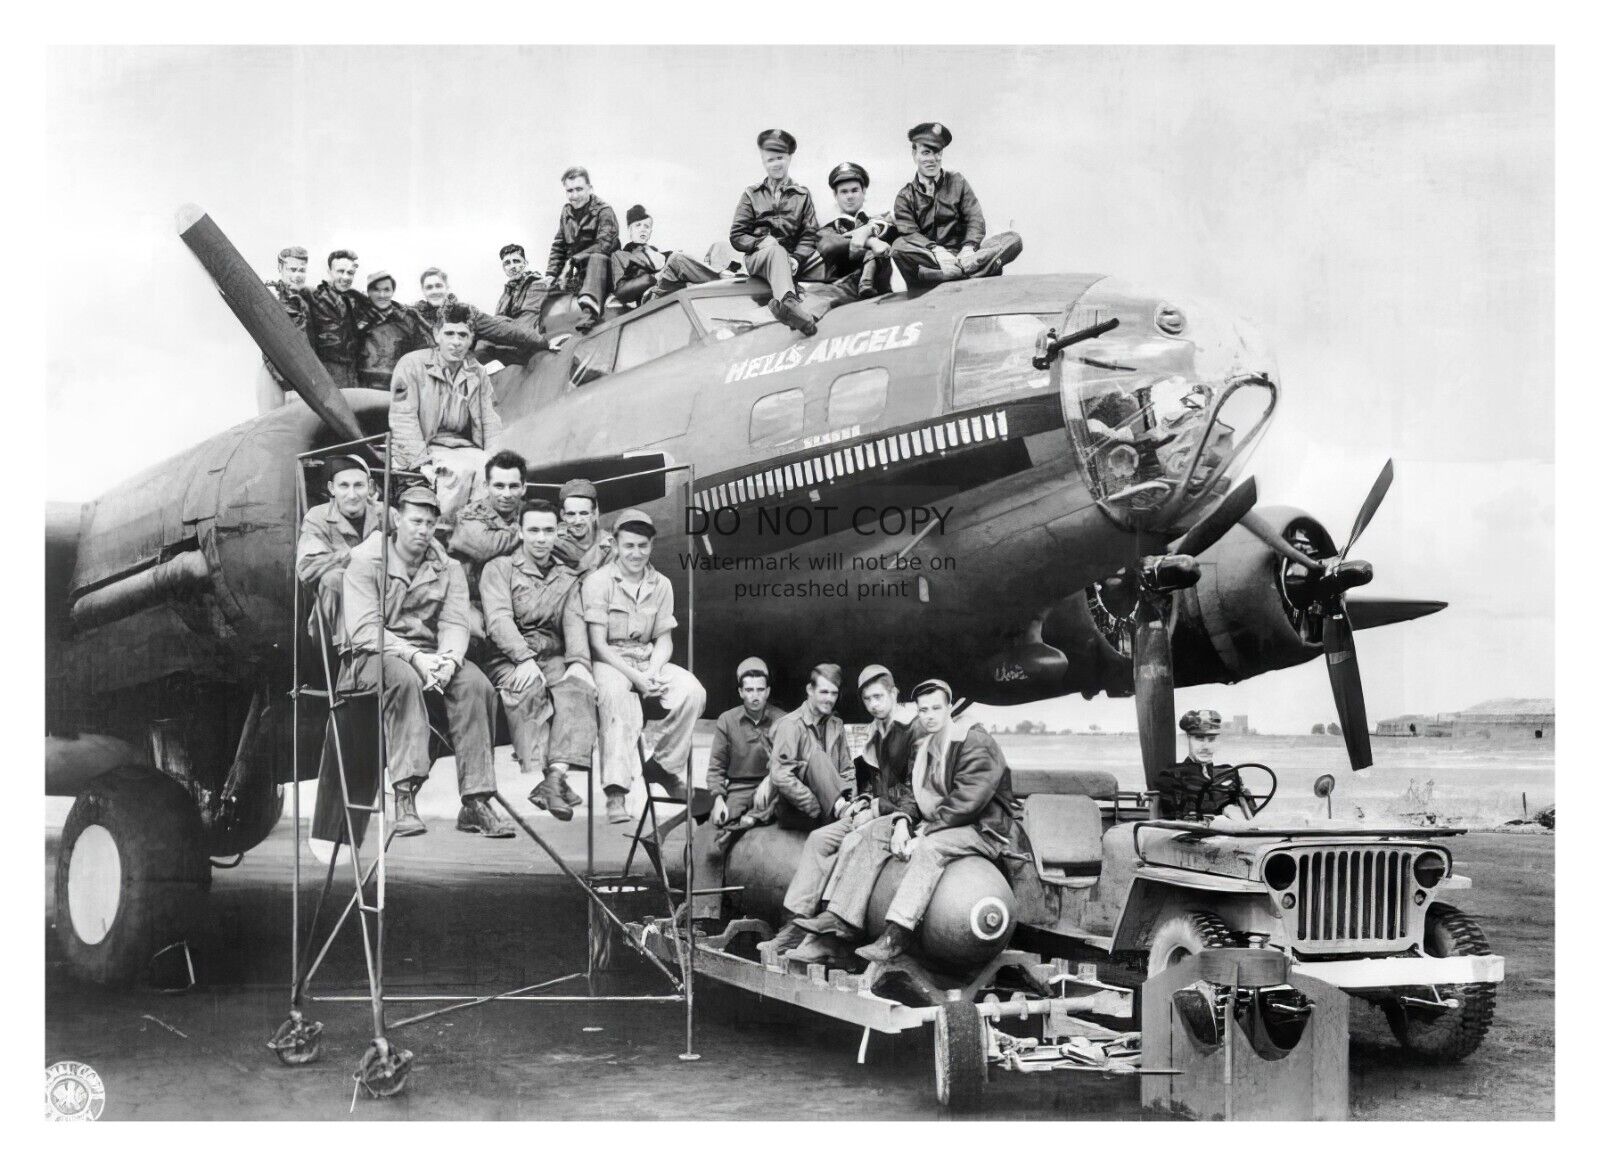 HELLS ANGELS B-17 303RD BOMBER CREW SQUAD FLYING FORTRESS WW2 WWII 5X7 PHOTO